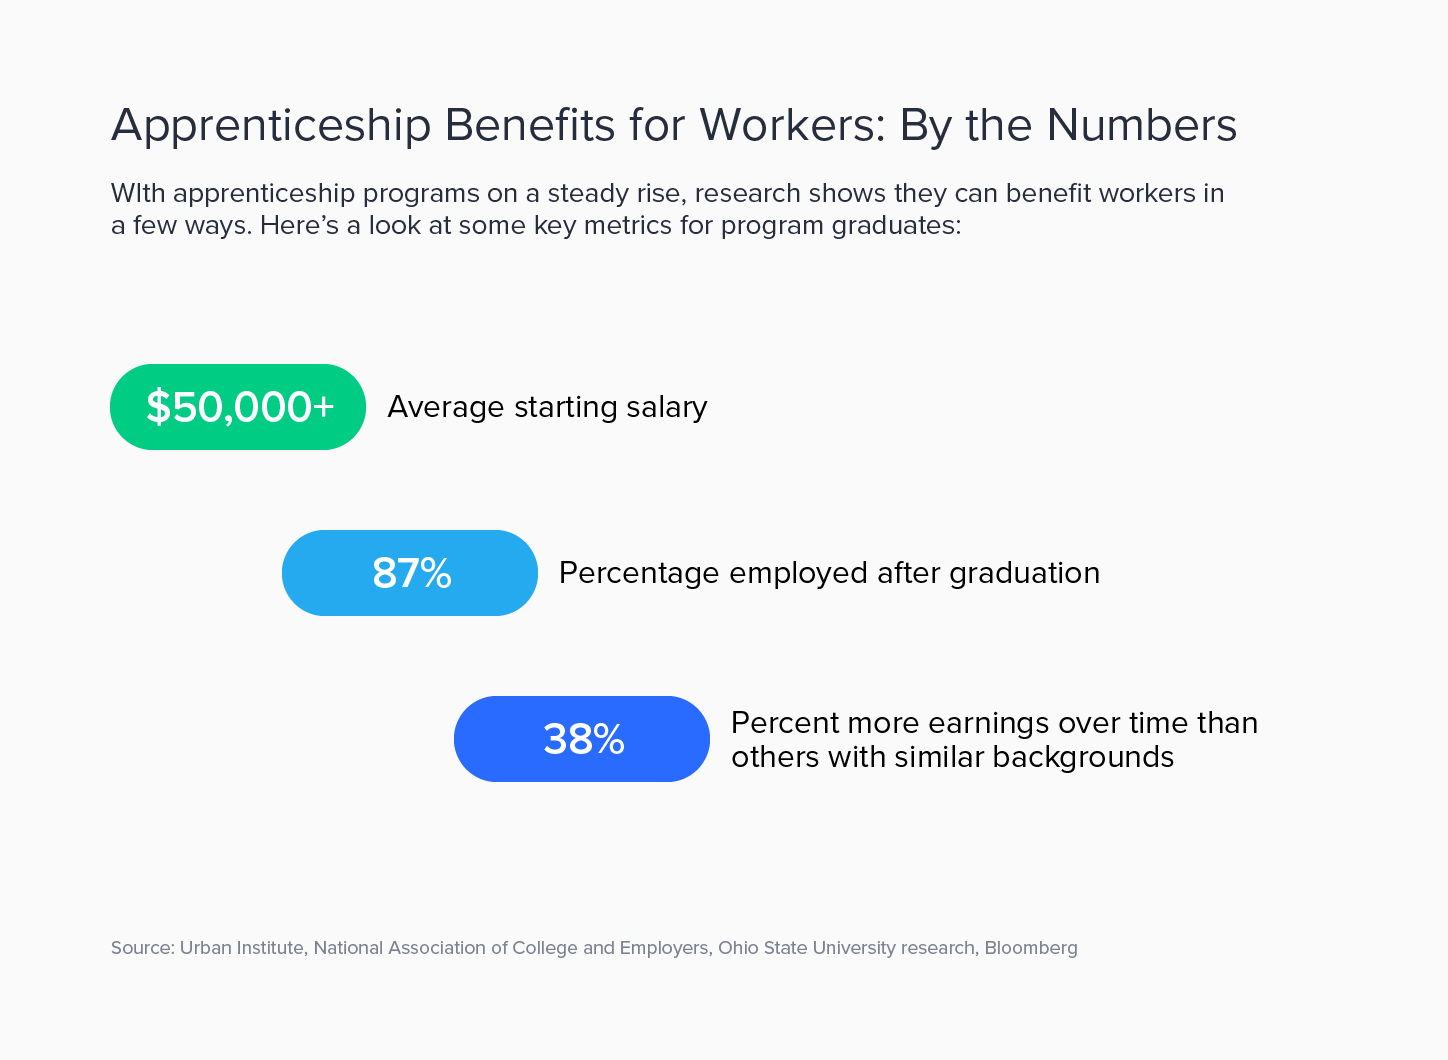 Key statistics for apprenticeship graduates. 87% receive an average of $50,000 as a starting salary.